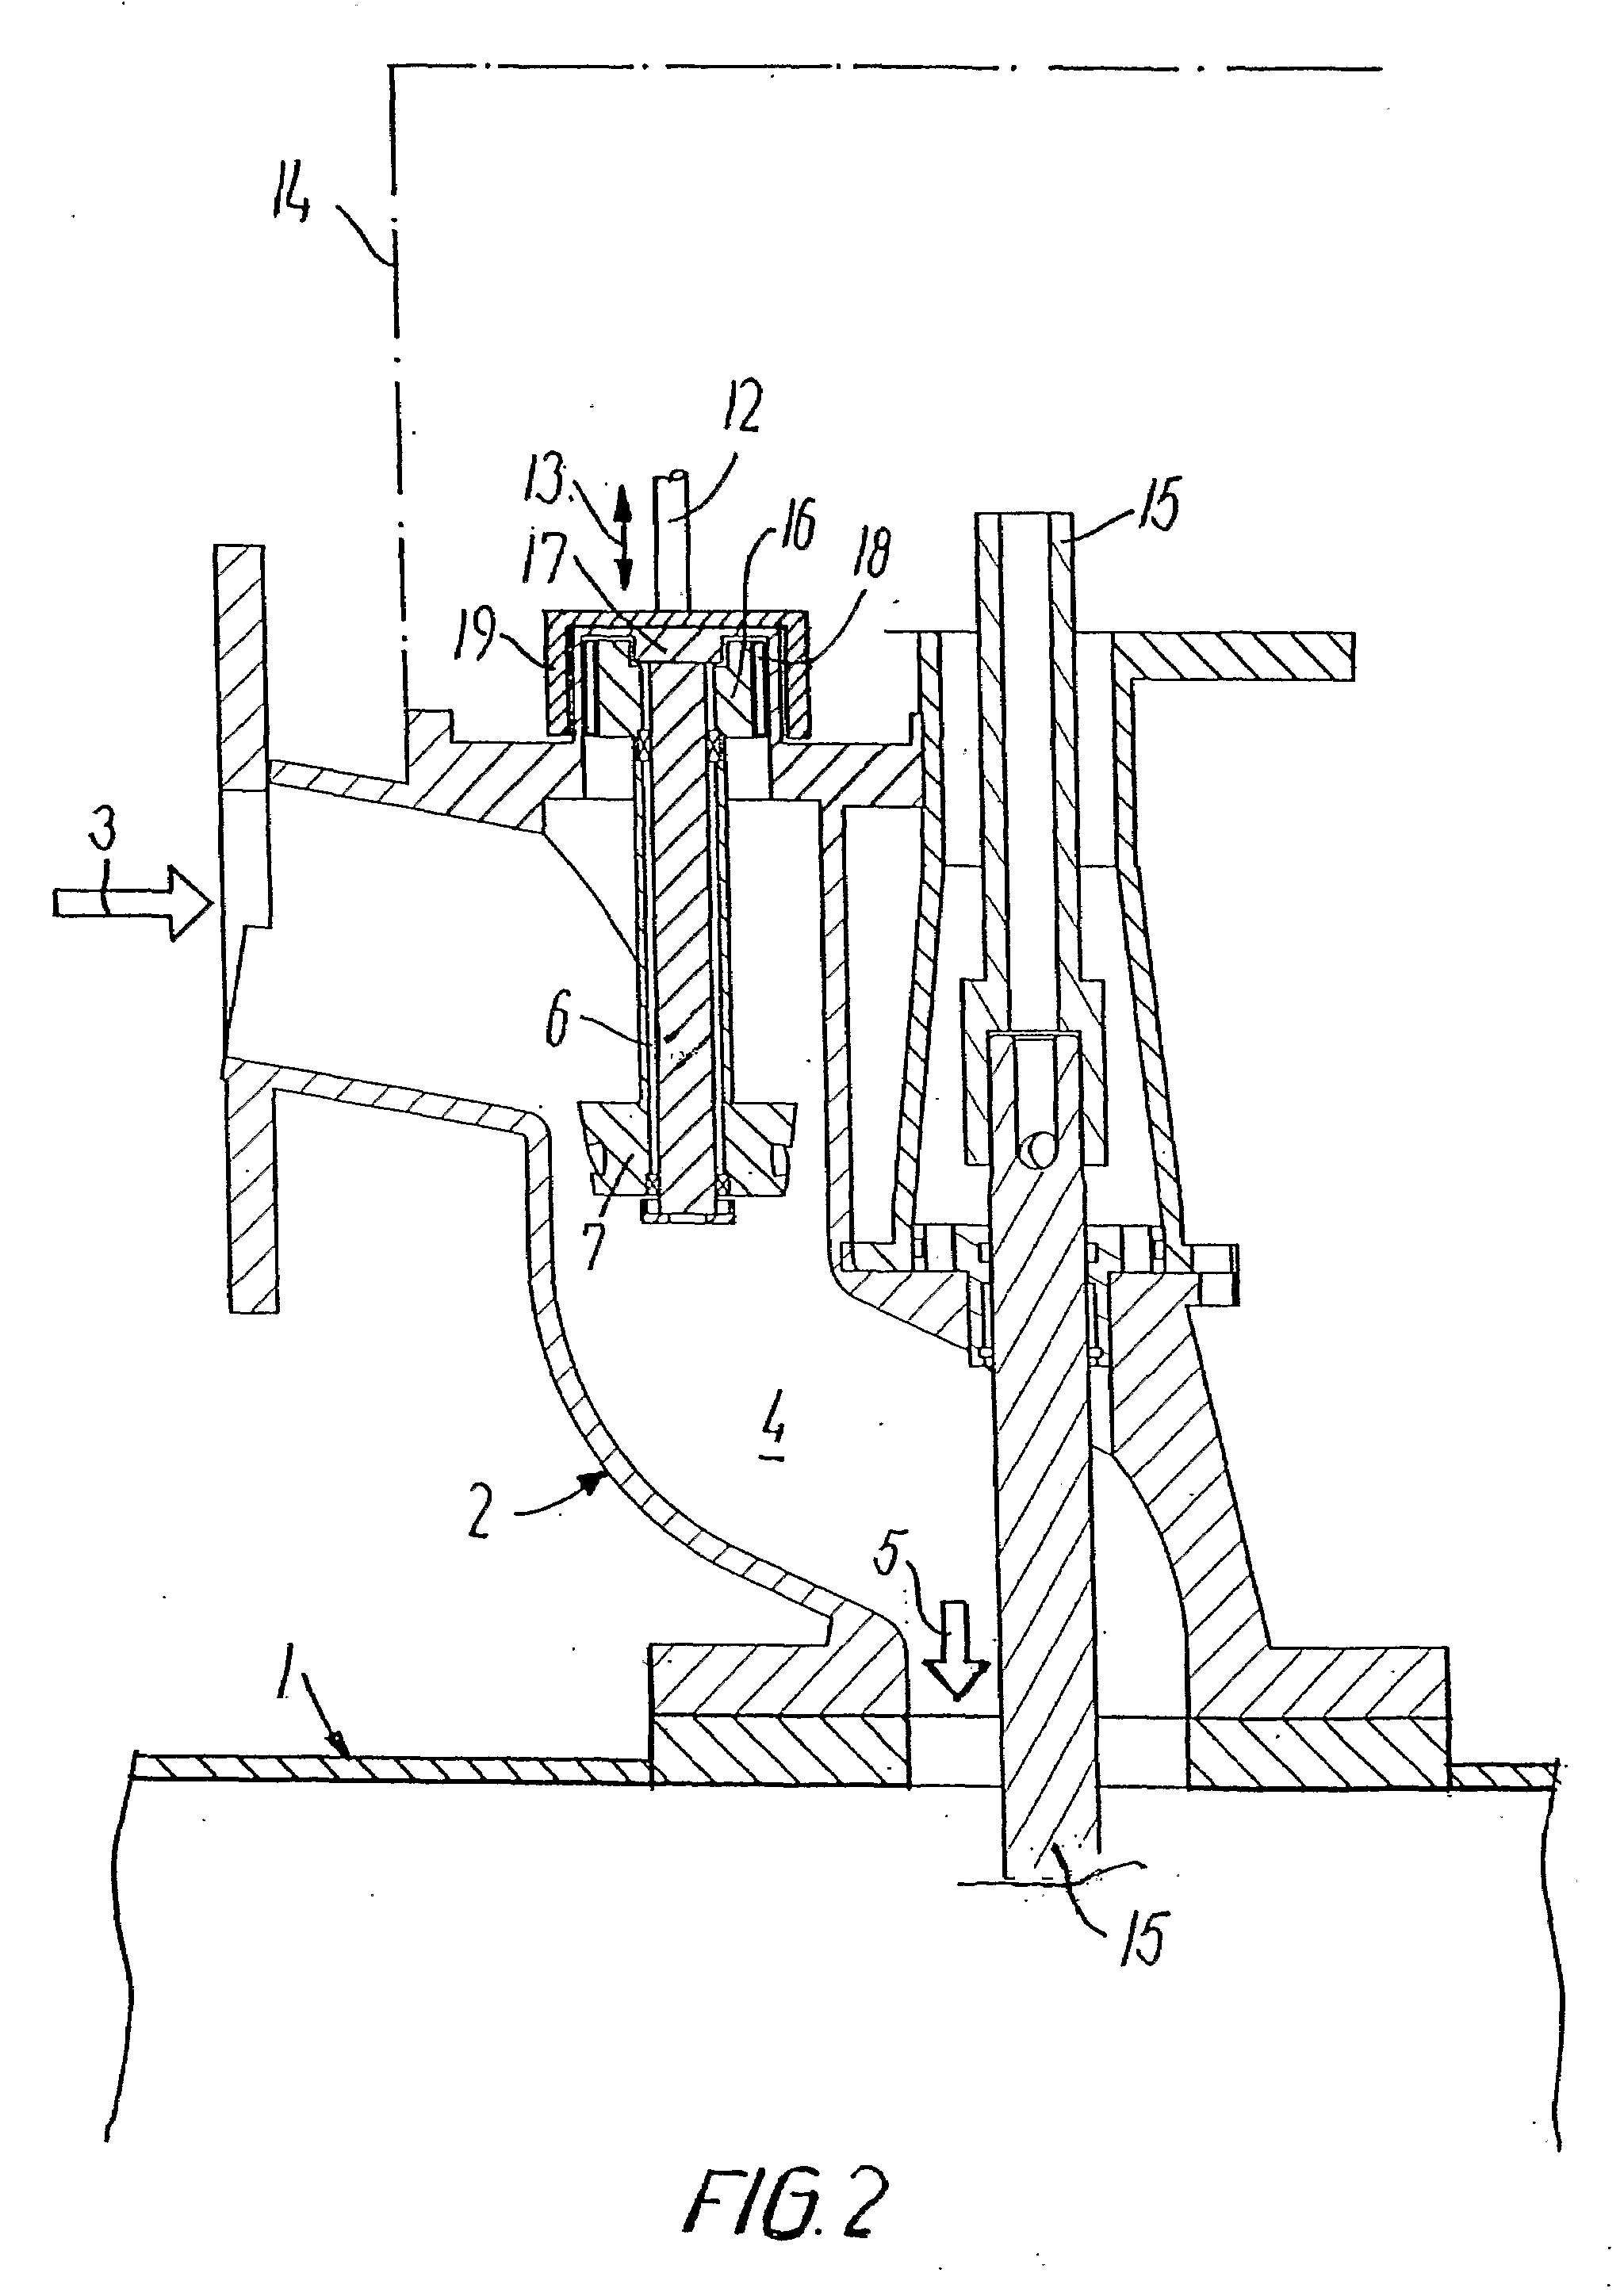 Drive System for a Cleaning Head Disposed in a Tank